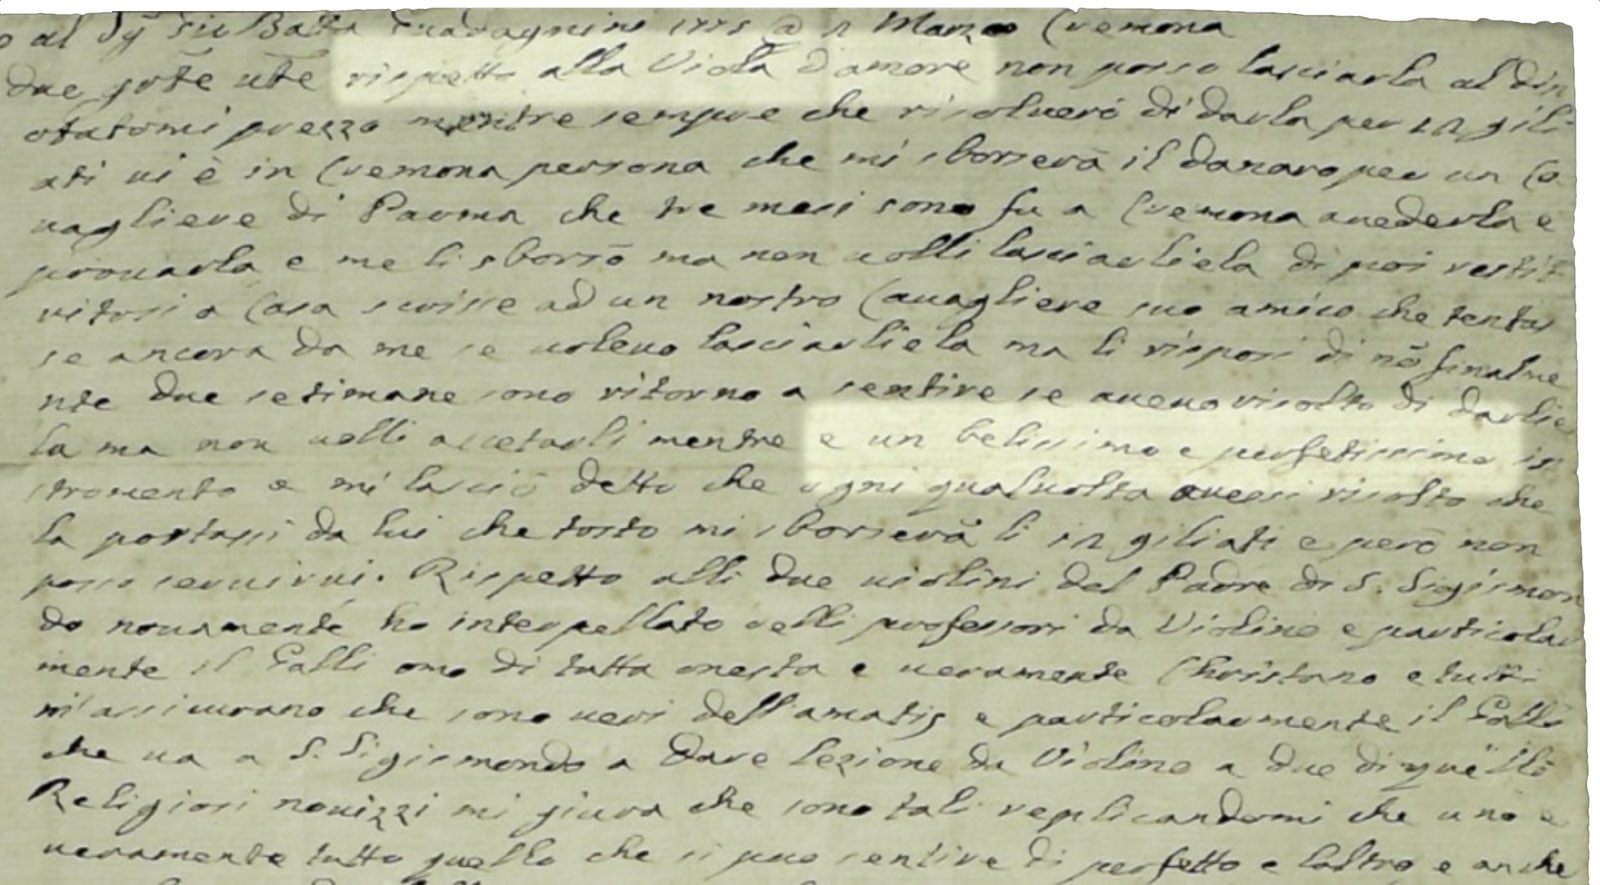 A letter from Paolo Stradivari to G. B. Guadagnini